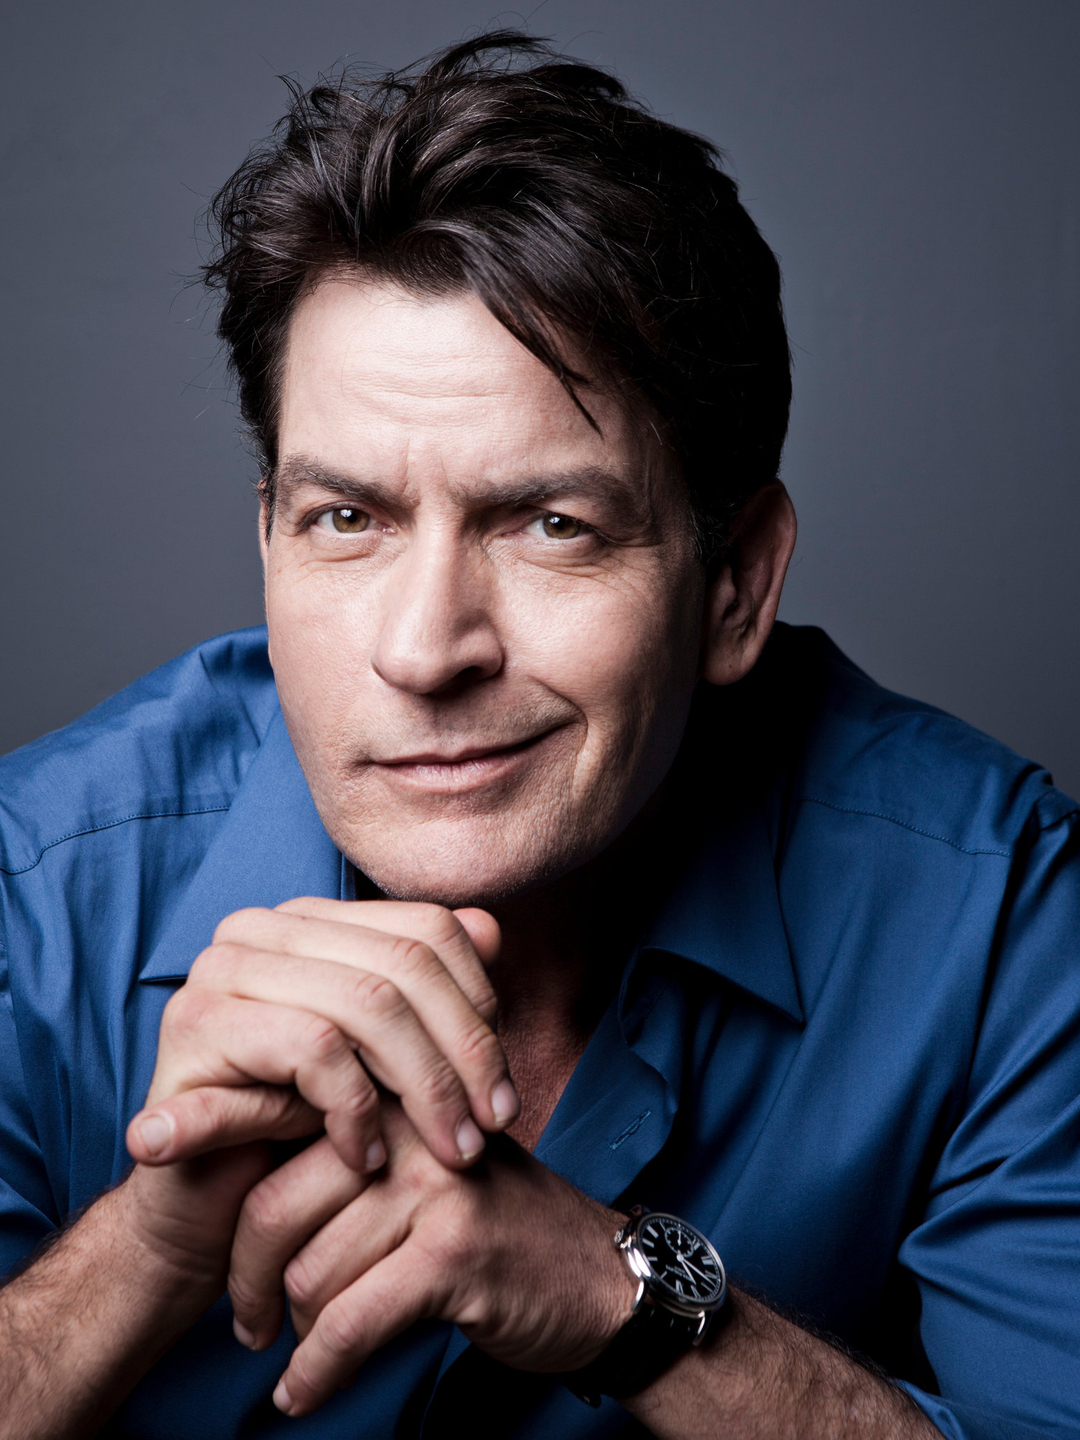 Charlie Sheen life story